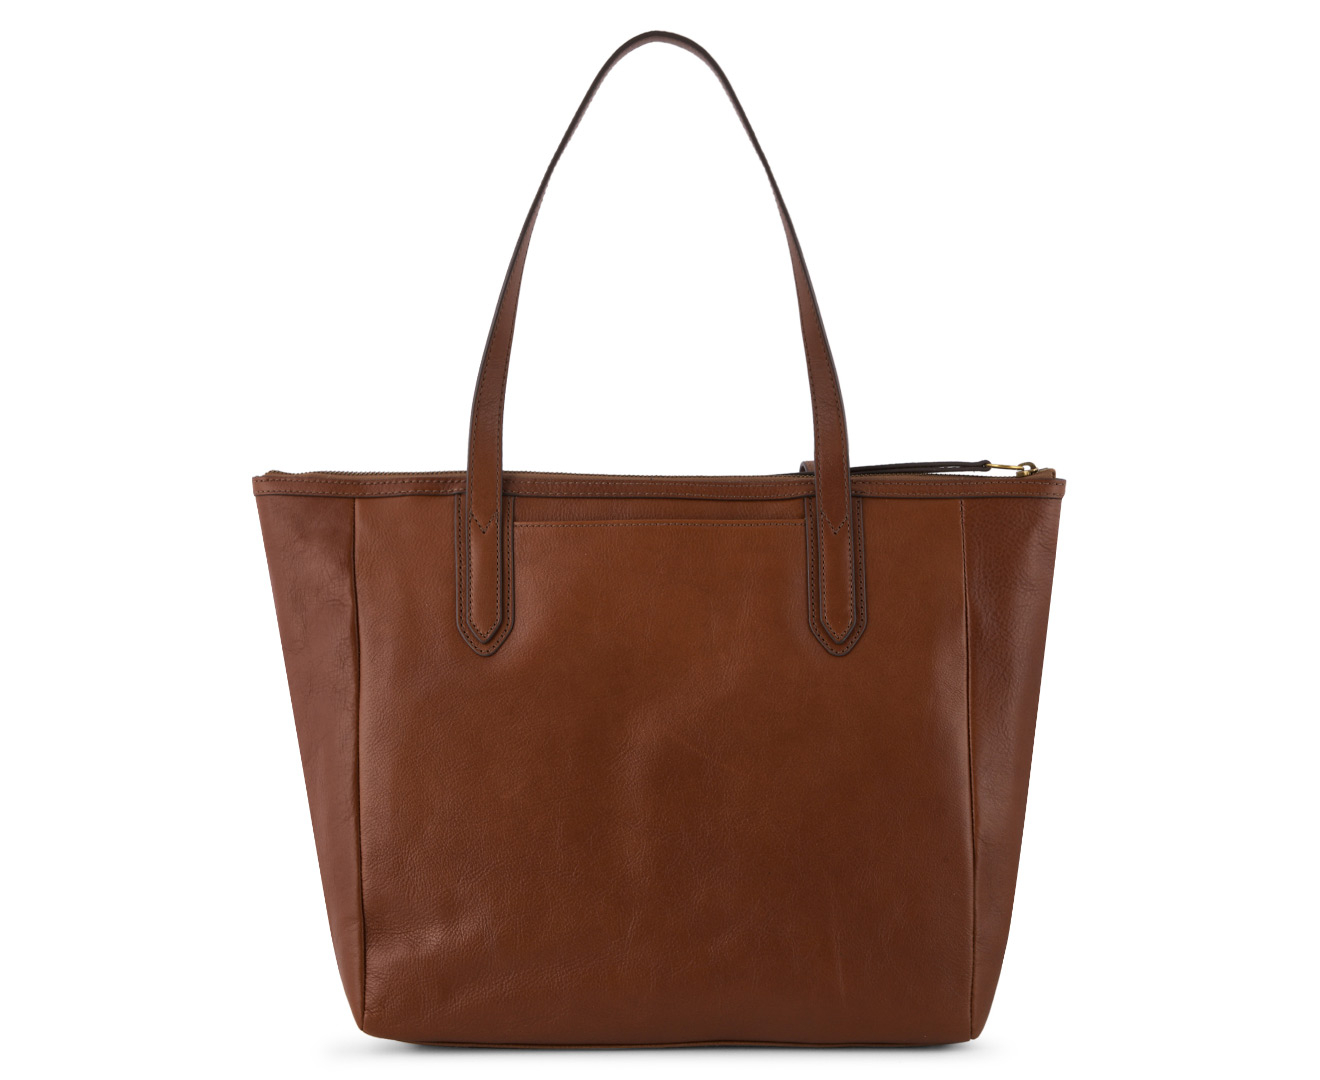 Fossil Sydney Tote Bag - Brown | Catch.co.nz